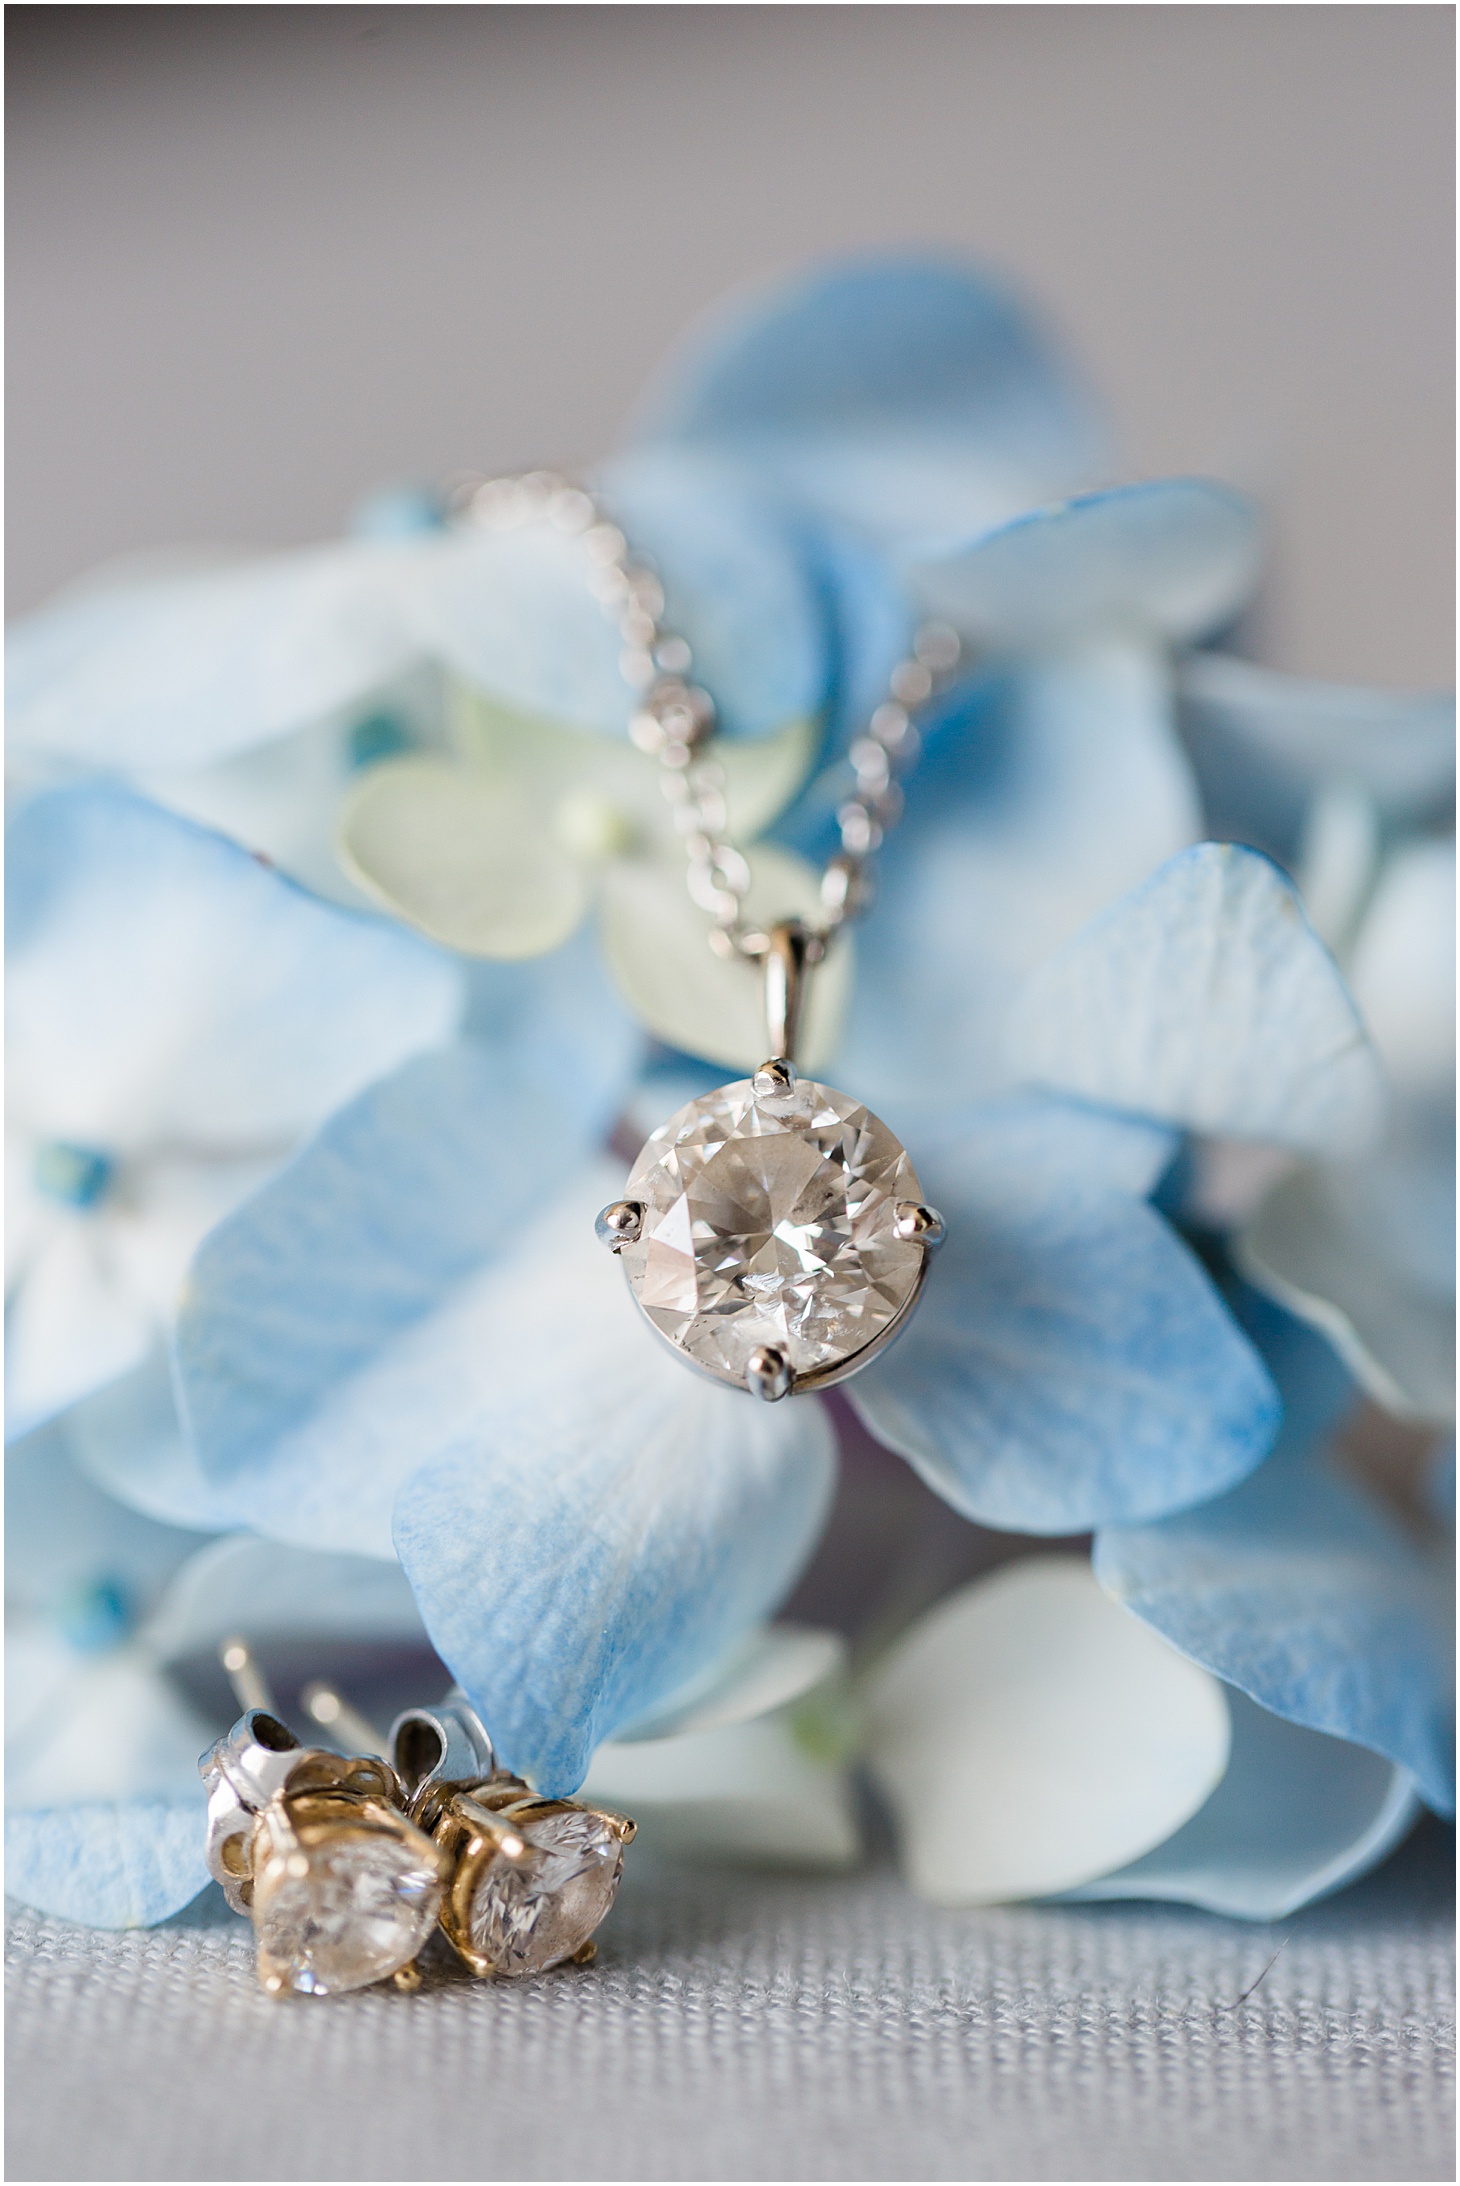 Diamond Earrings and Necklace, Bridal Details at Donovan Hotel, Dusty Blue and Pink Jewish Wedding at Women in the Arts, Sarah Bradshaw Photography, DC Wedding Photographer 